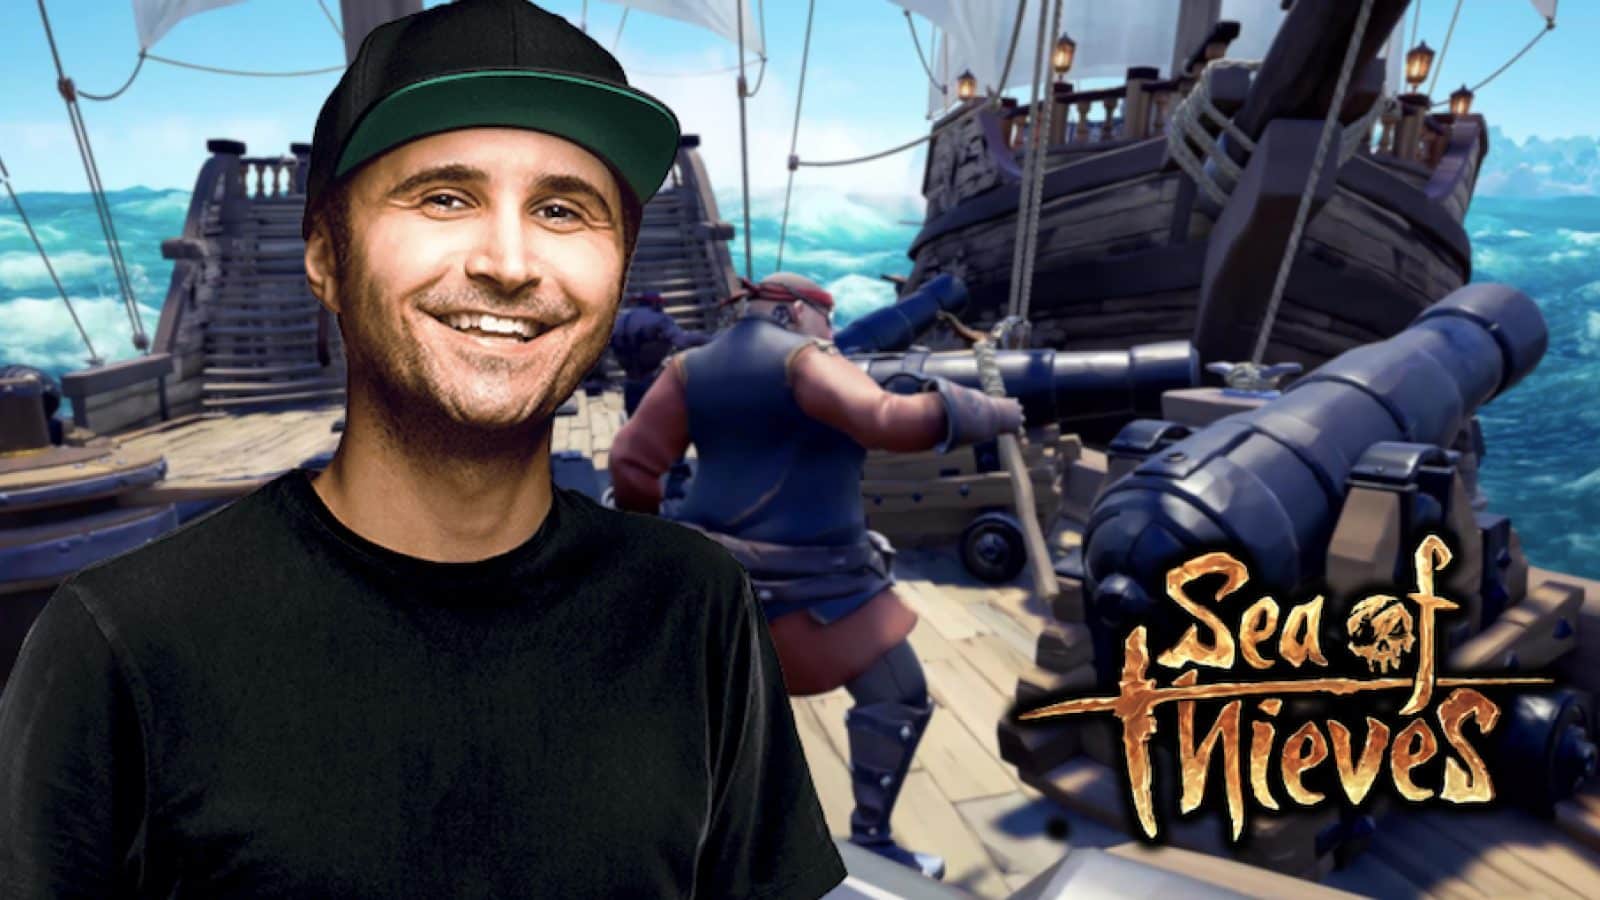 summit1g superimposed into a Sea of Thieves image